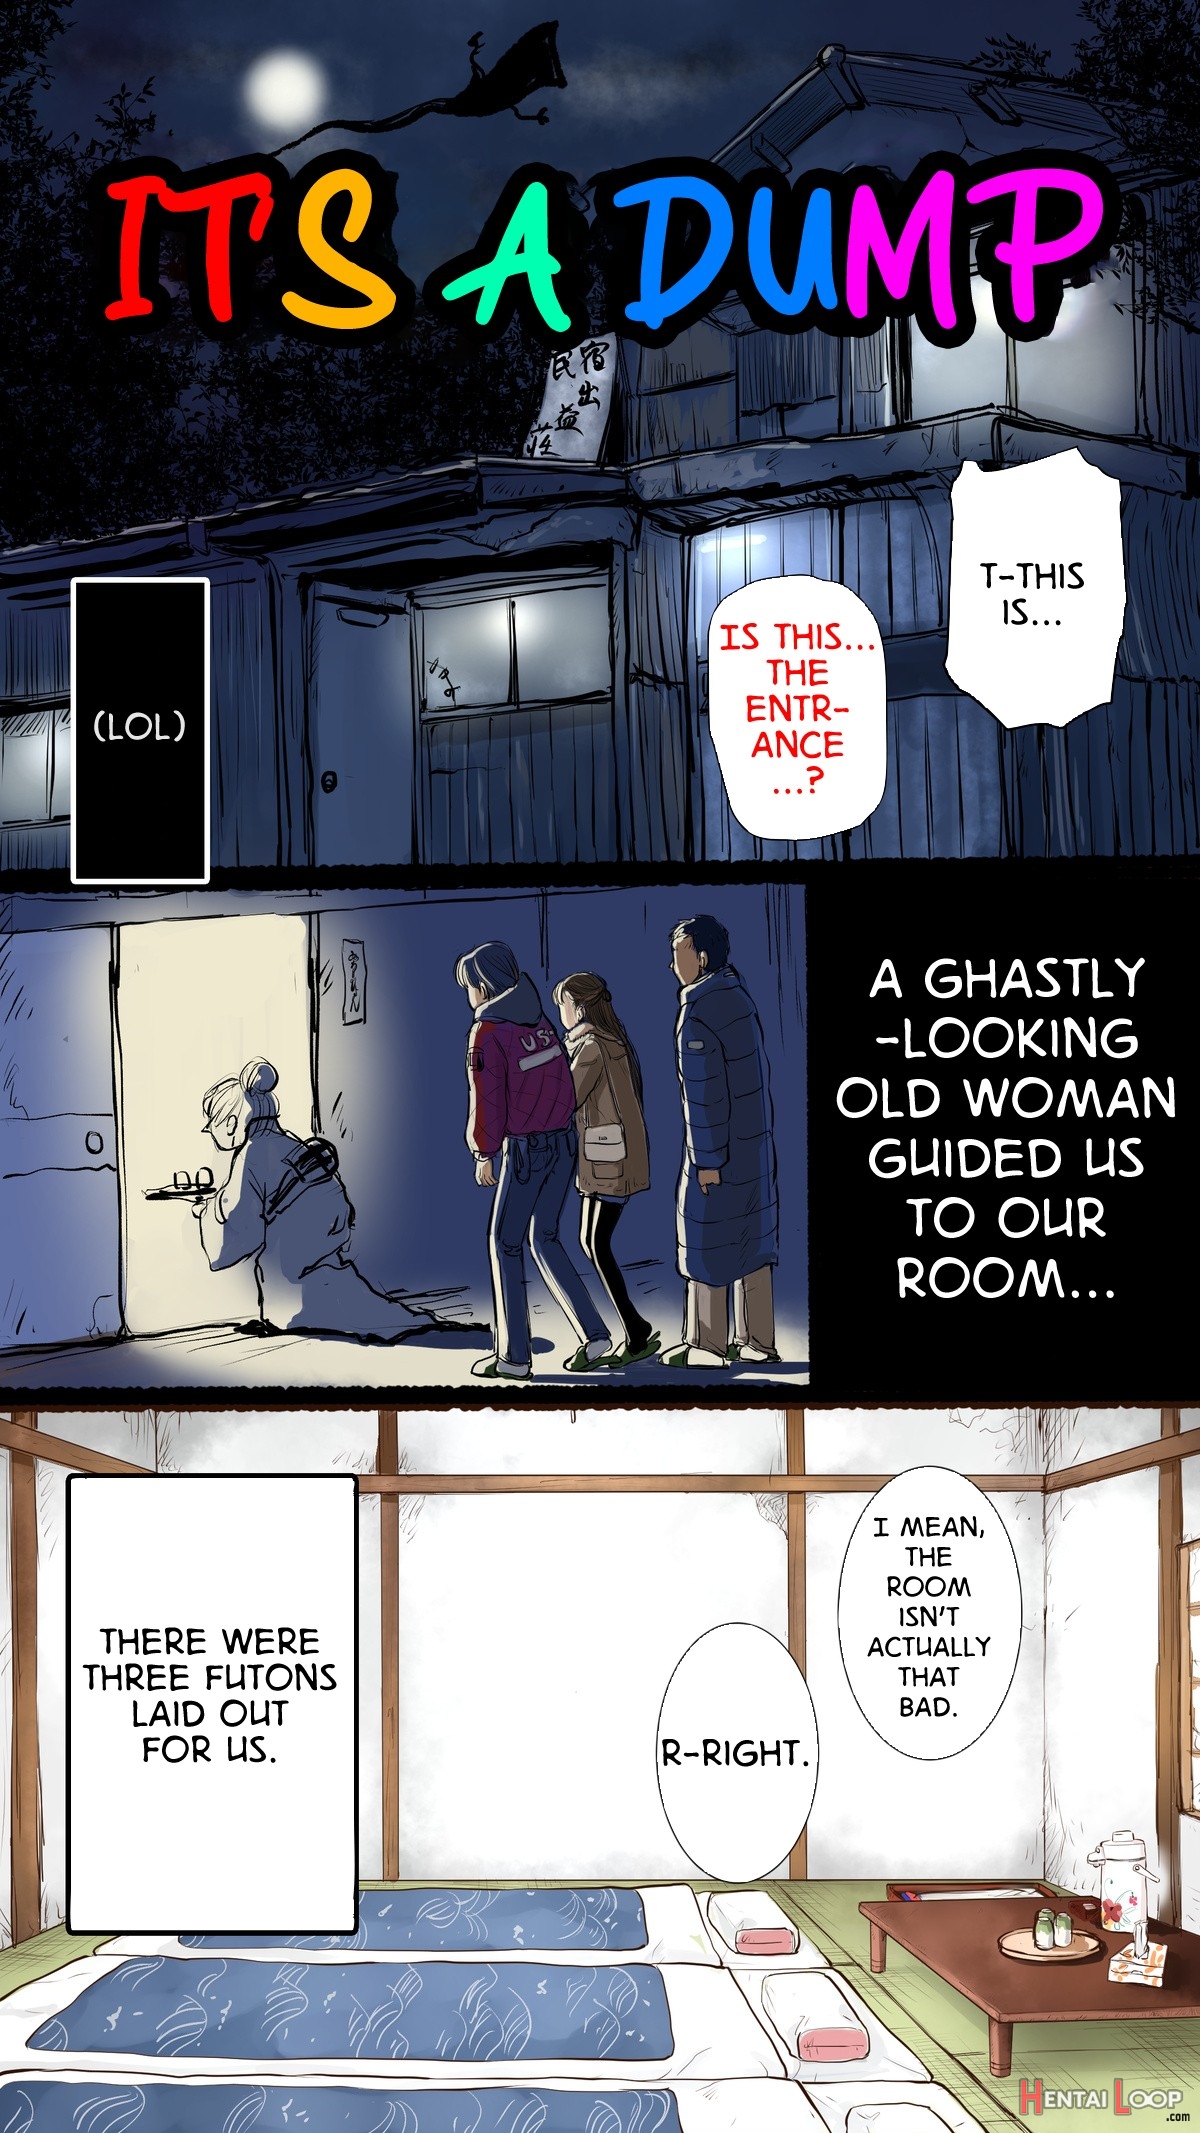 Hot Spring Inn Story page 4